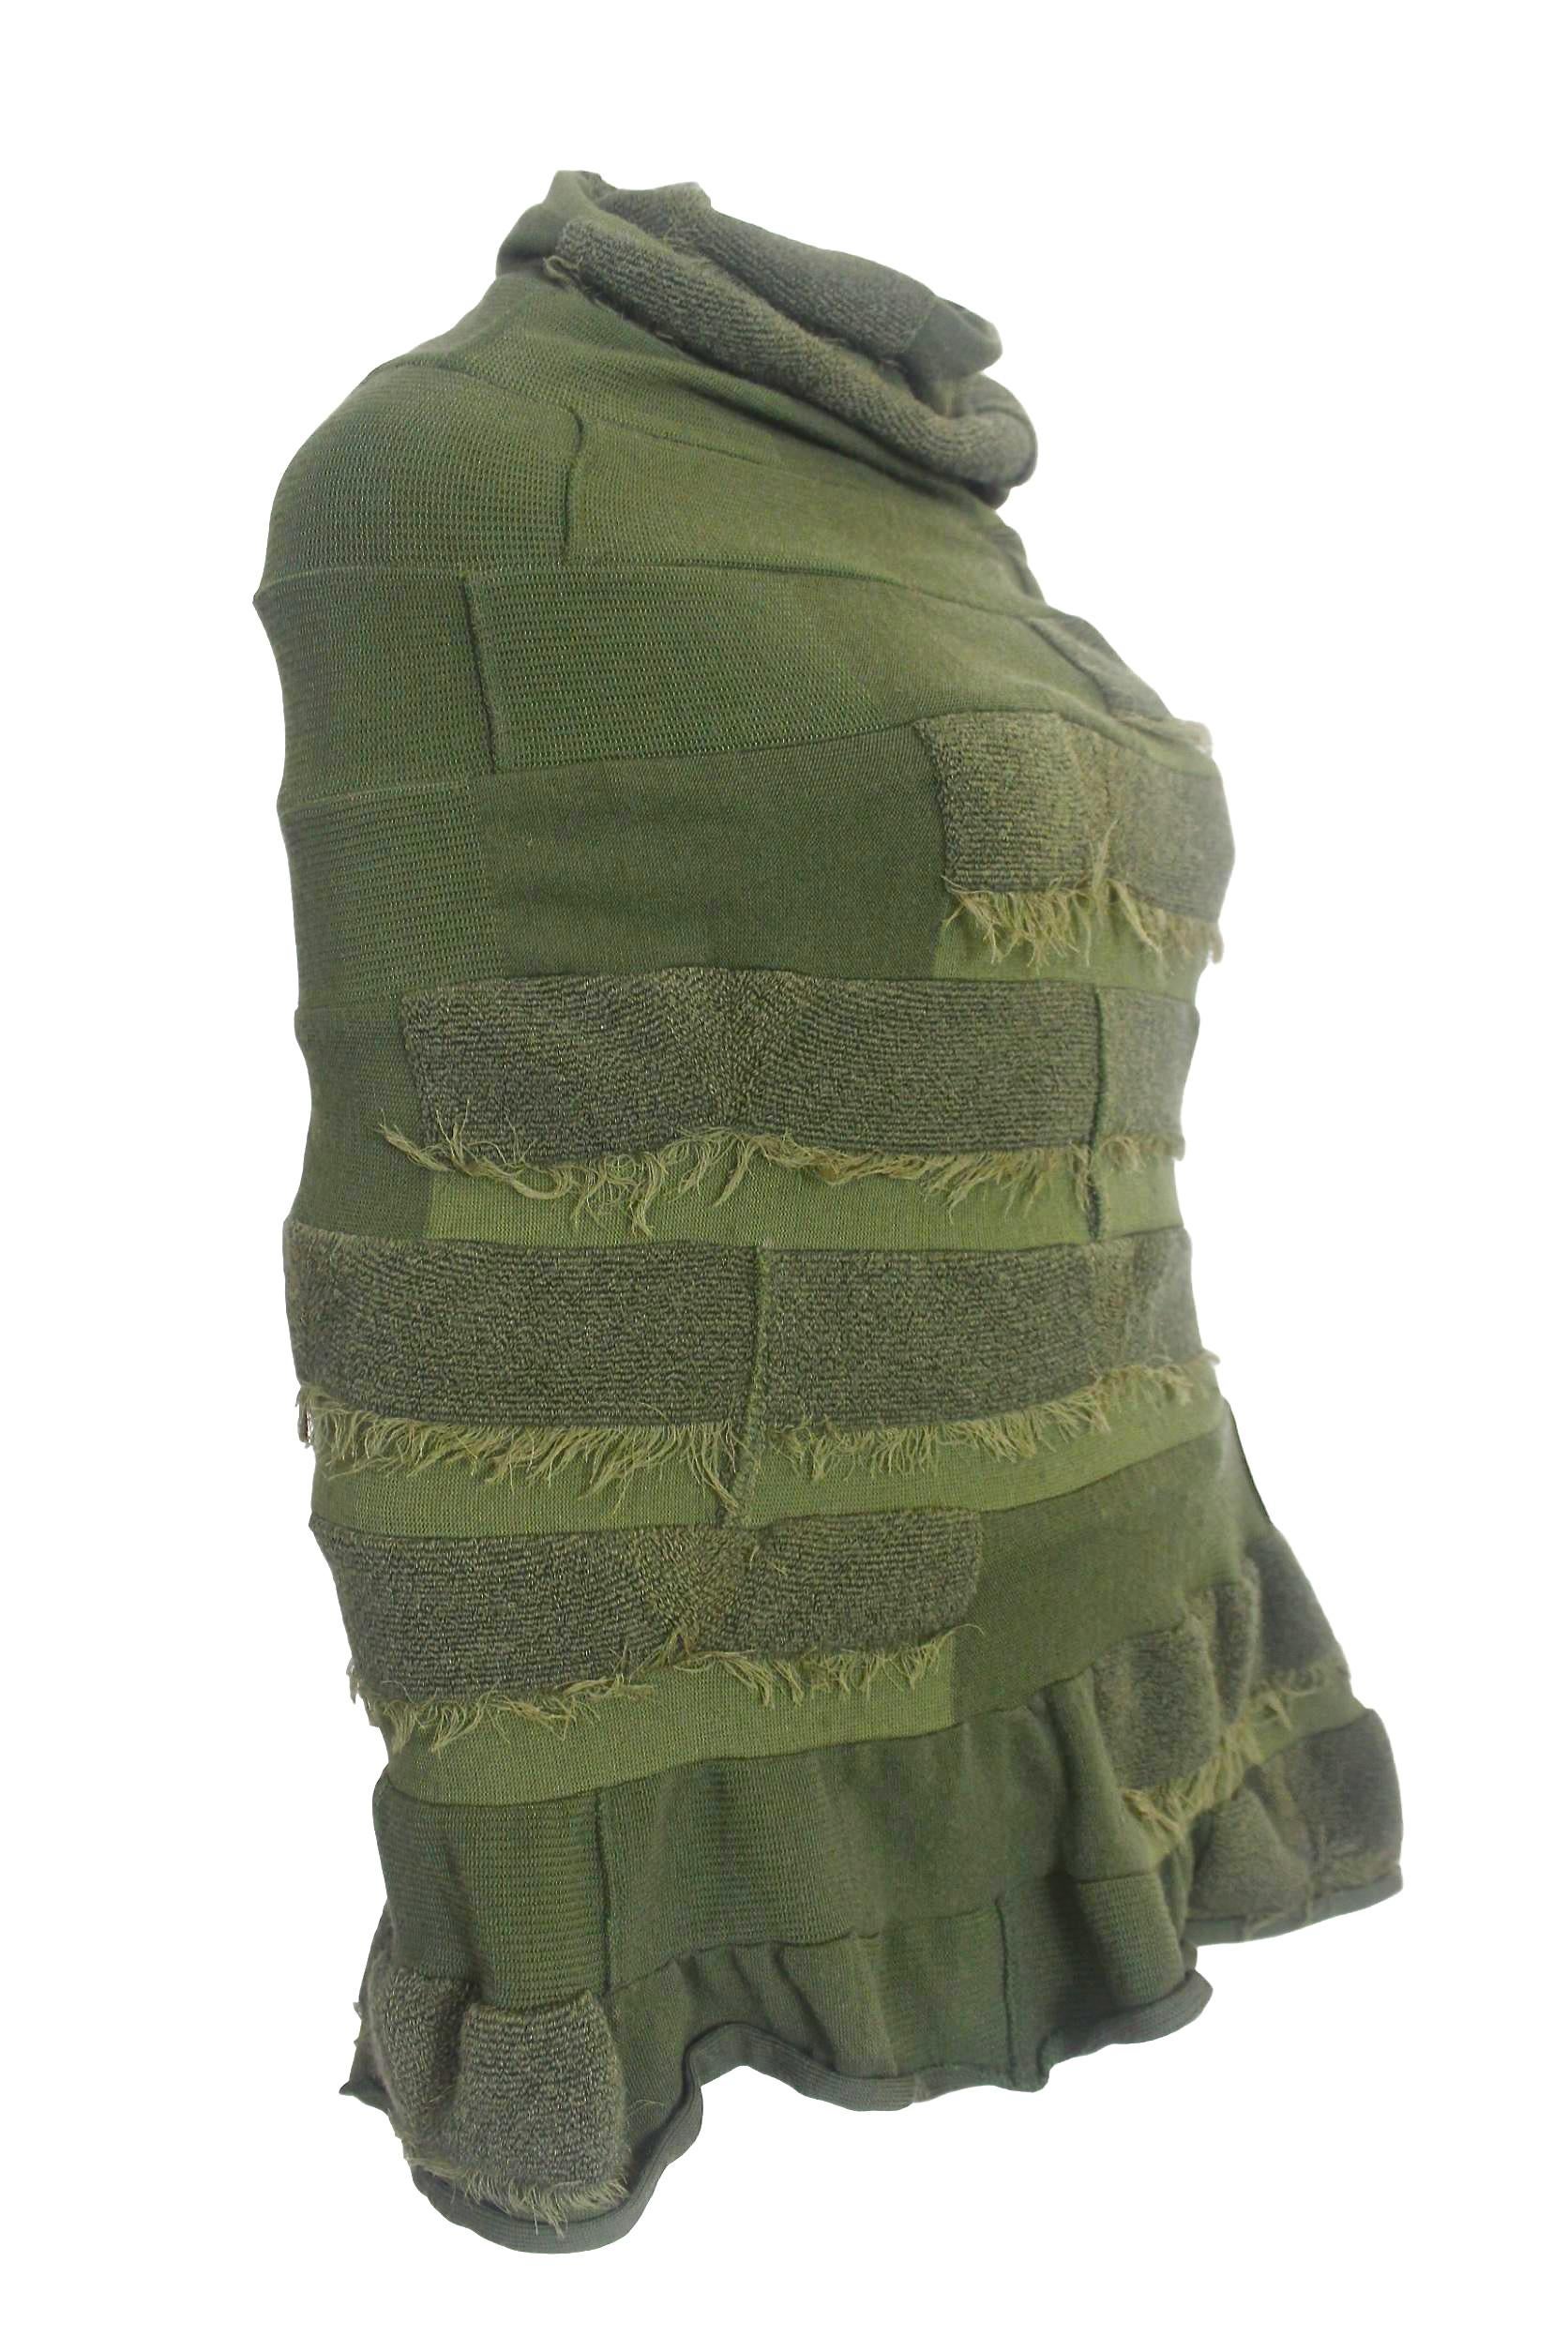 Gray Comme des Garçons Junya Watanabe 2006 Collection Military Knitted Poncho